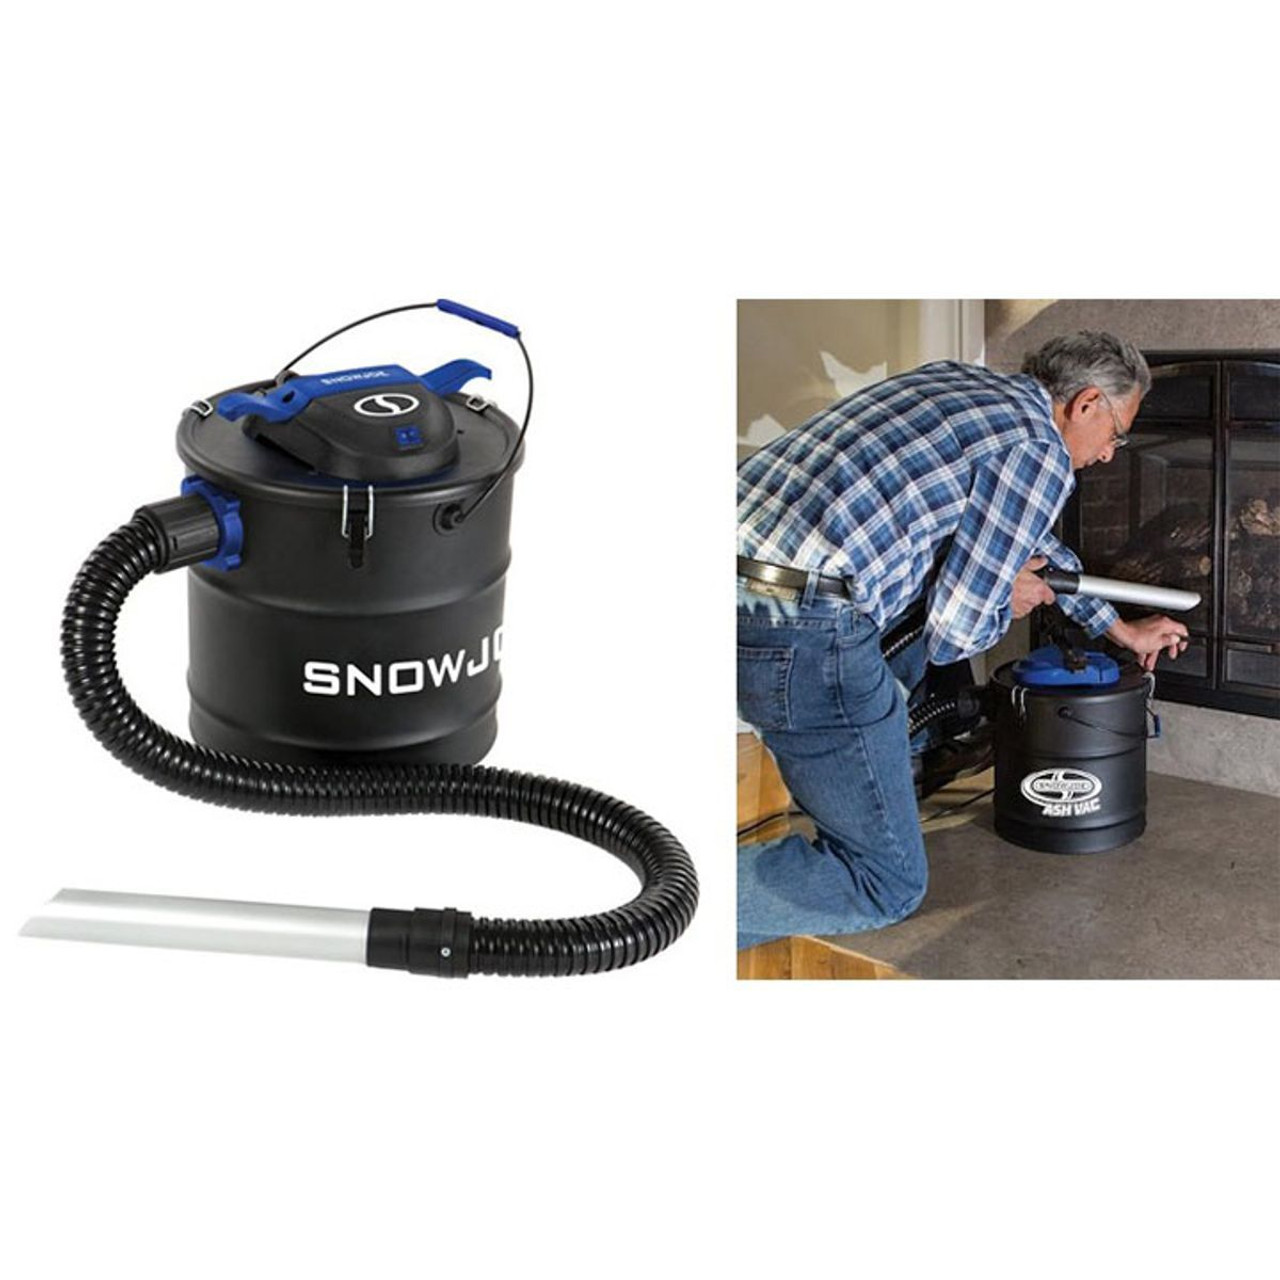 Snow Joe 4.8 Gallon Ash Vacuum for Fire Places, Grills & More   product image